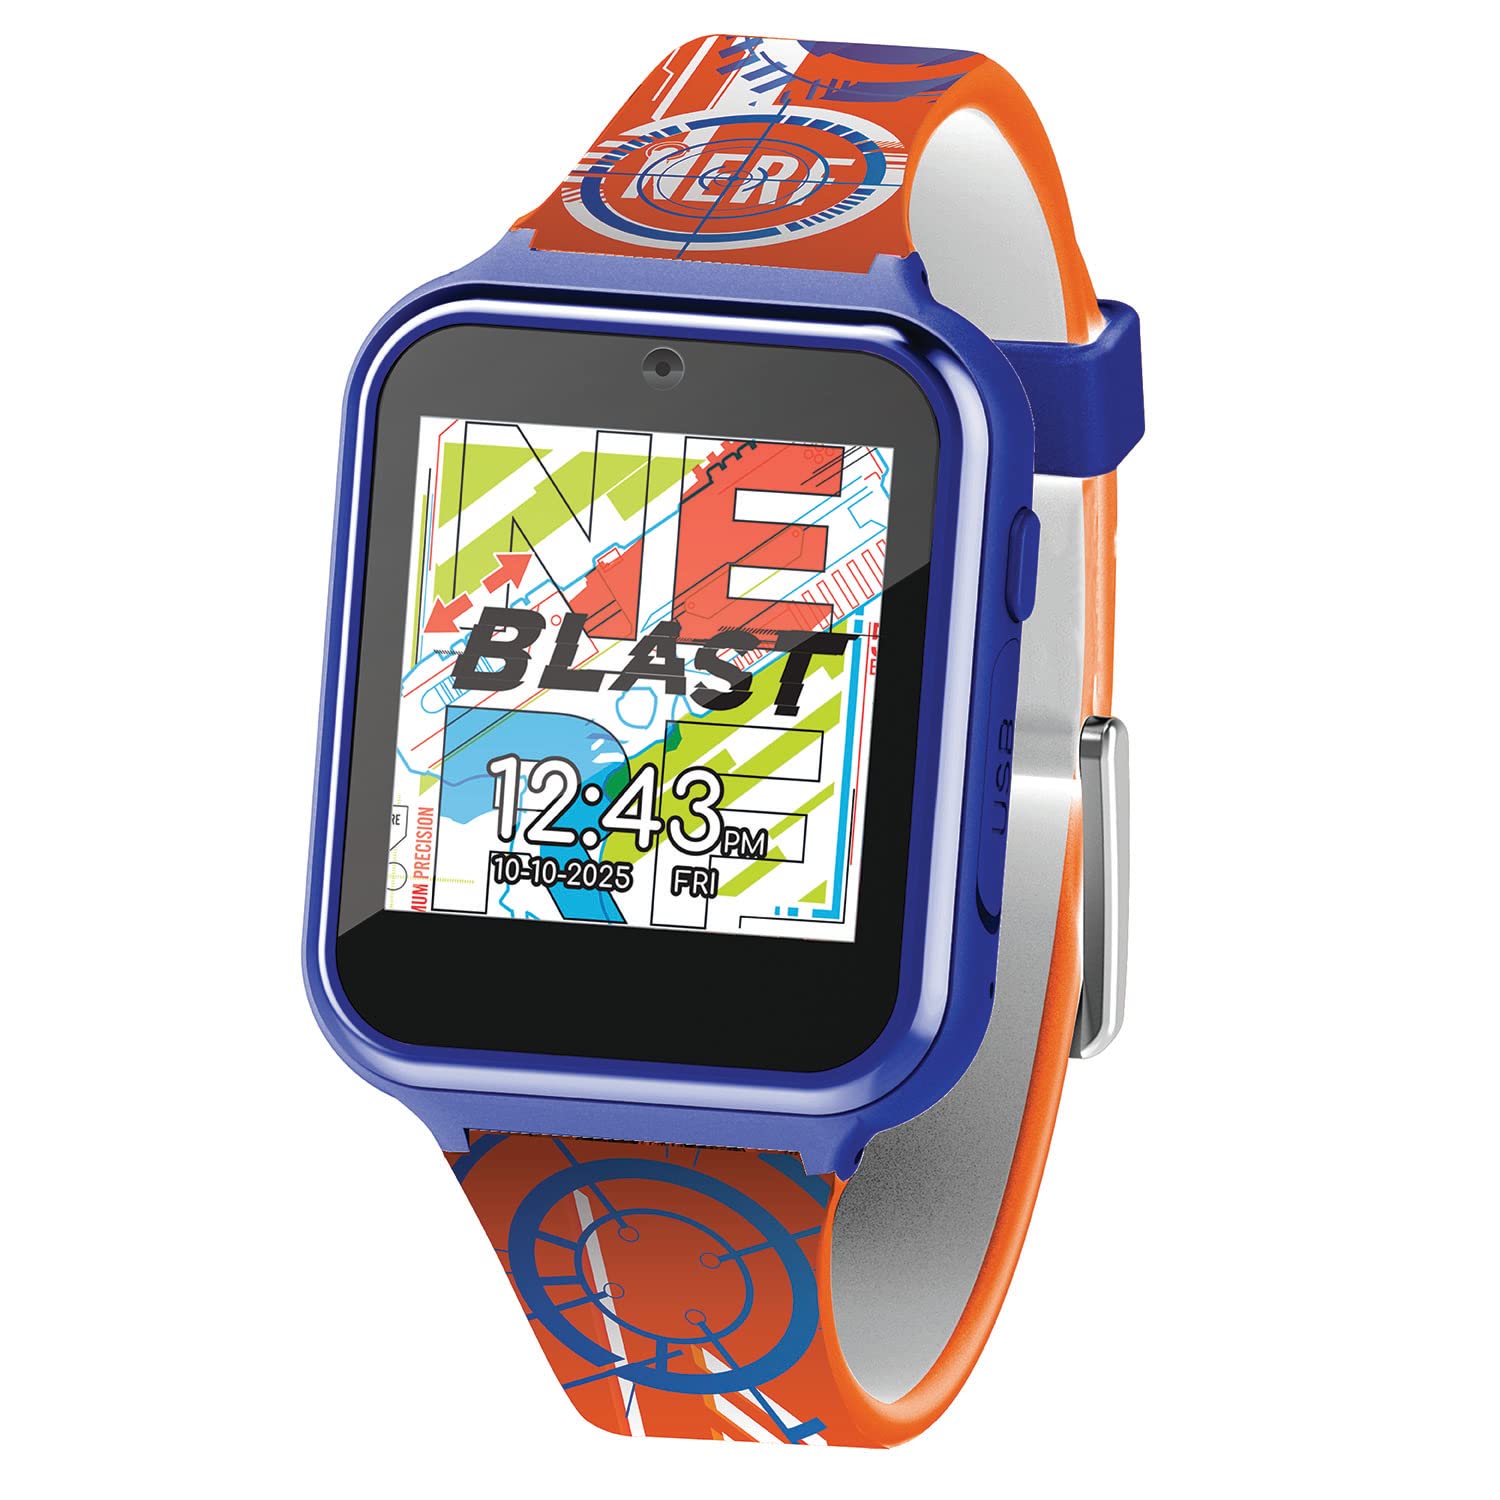 Accutime Nerf Kids Orange Educational Learning Touchscreen Smart Watch Toy for Girls, Boys, Toddlers - Selfie Cam, Learning Games, Alarm, Calculator, Pedometer & More (Model: NRF4019AZ)